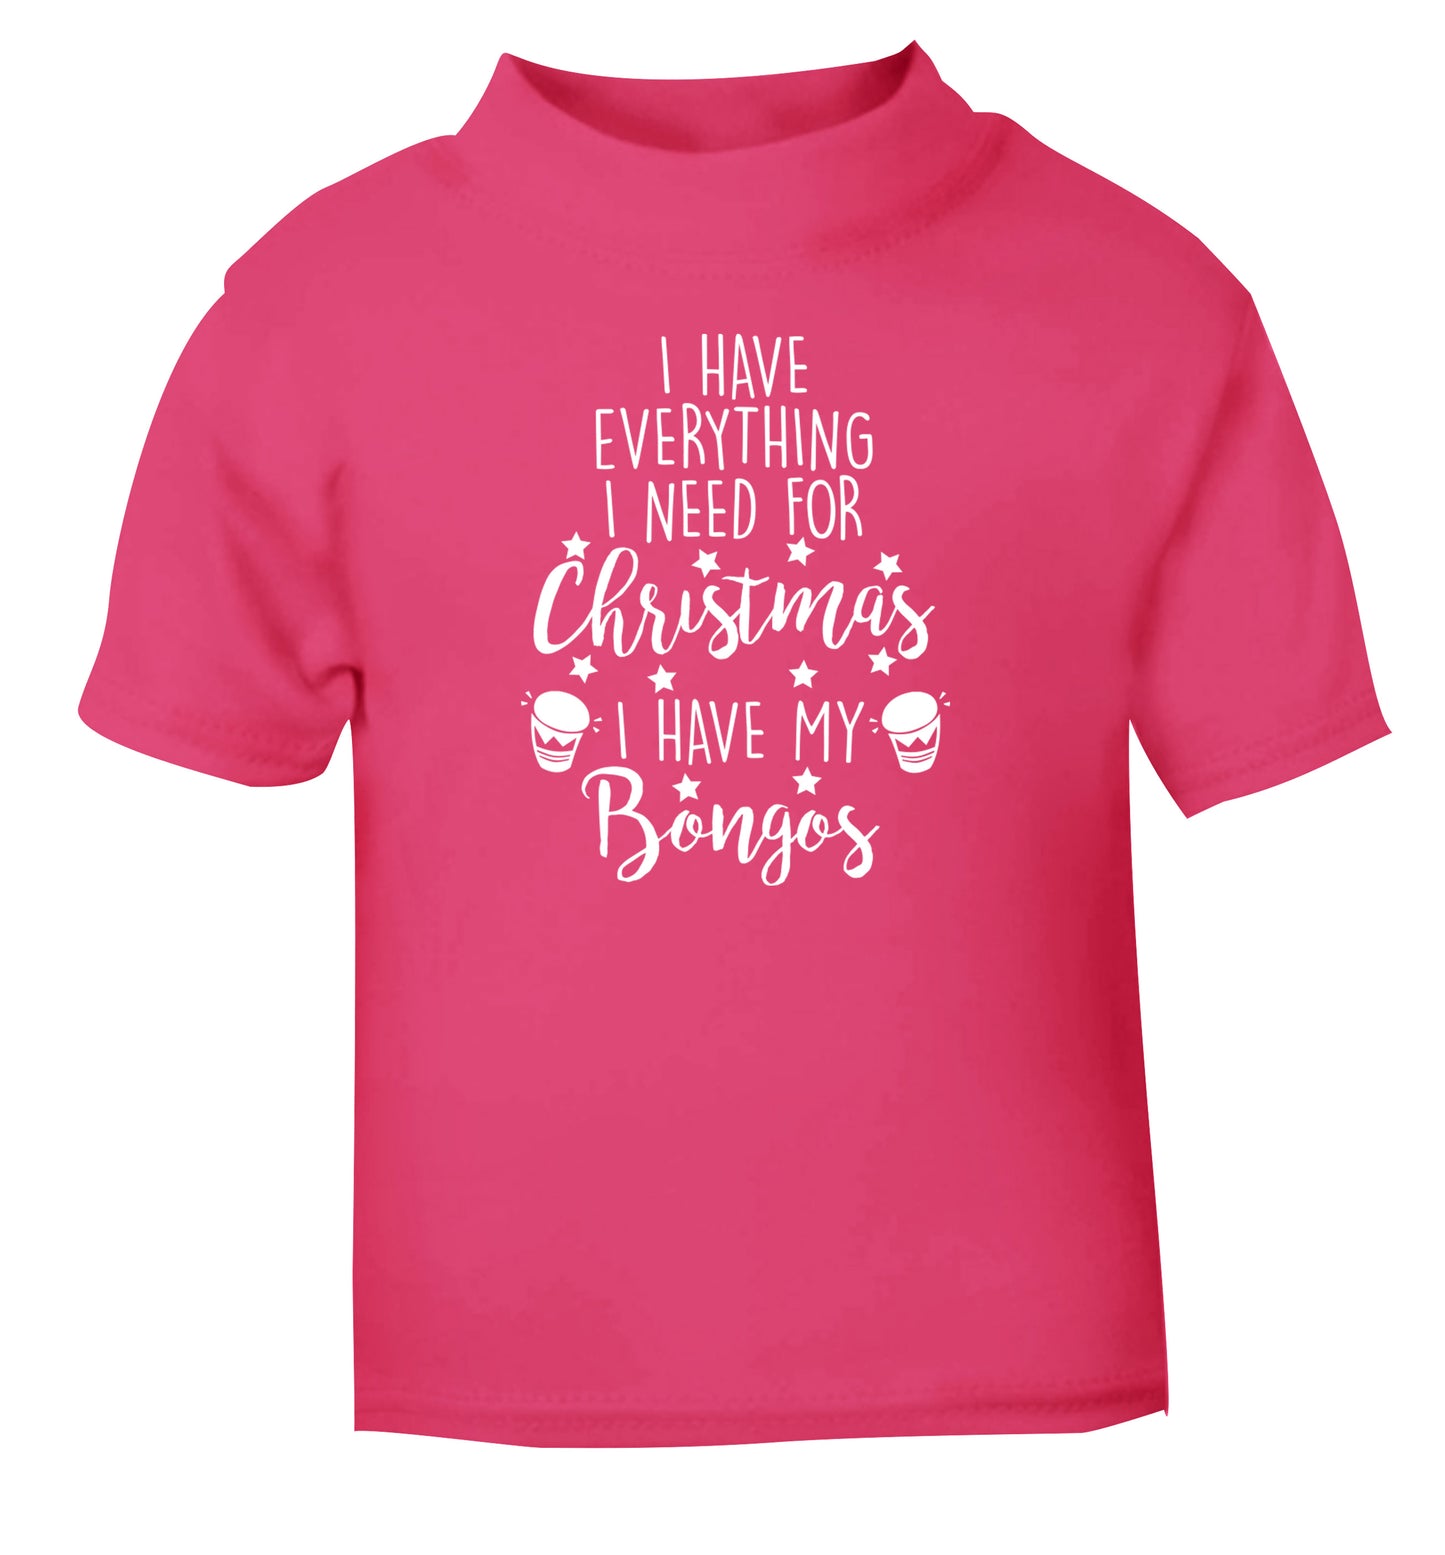 I have everything I need for Christmas I have my bongos! pink Baby Toddler Tshirt 2 Years